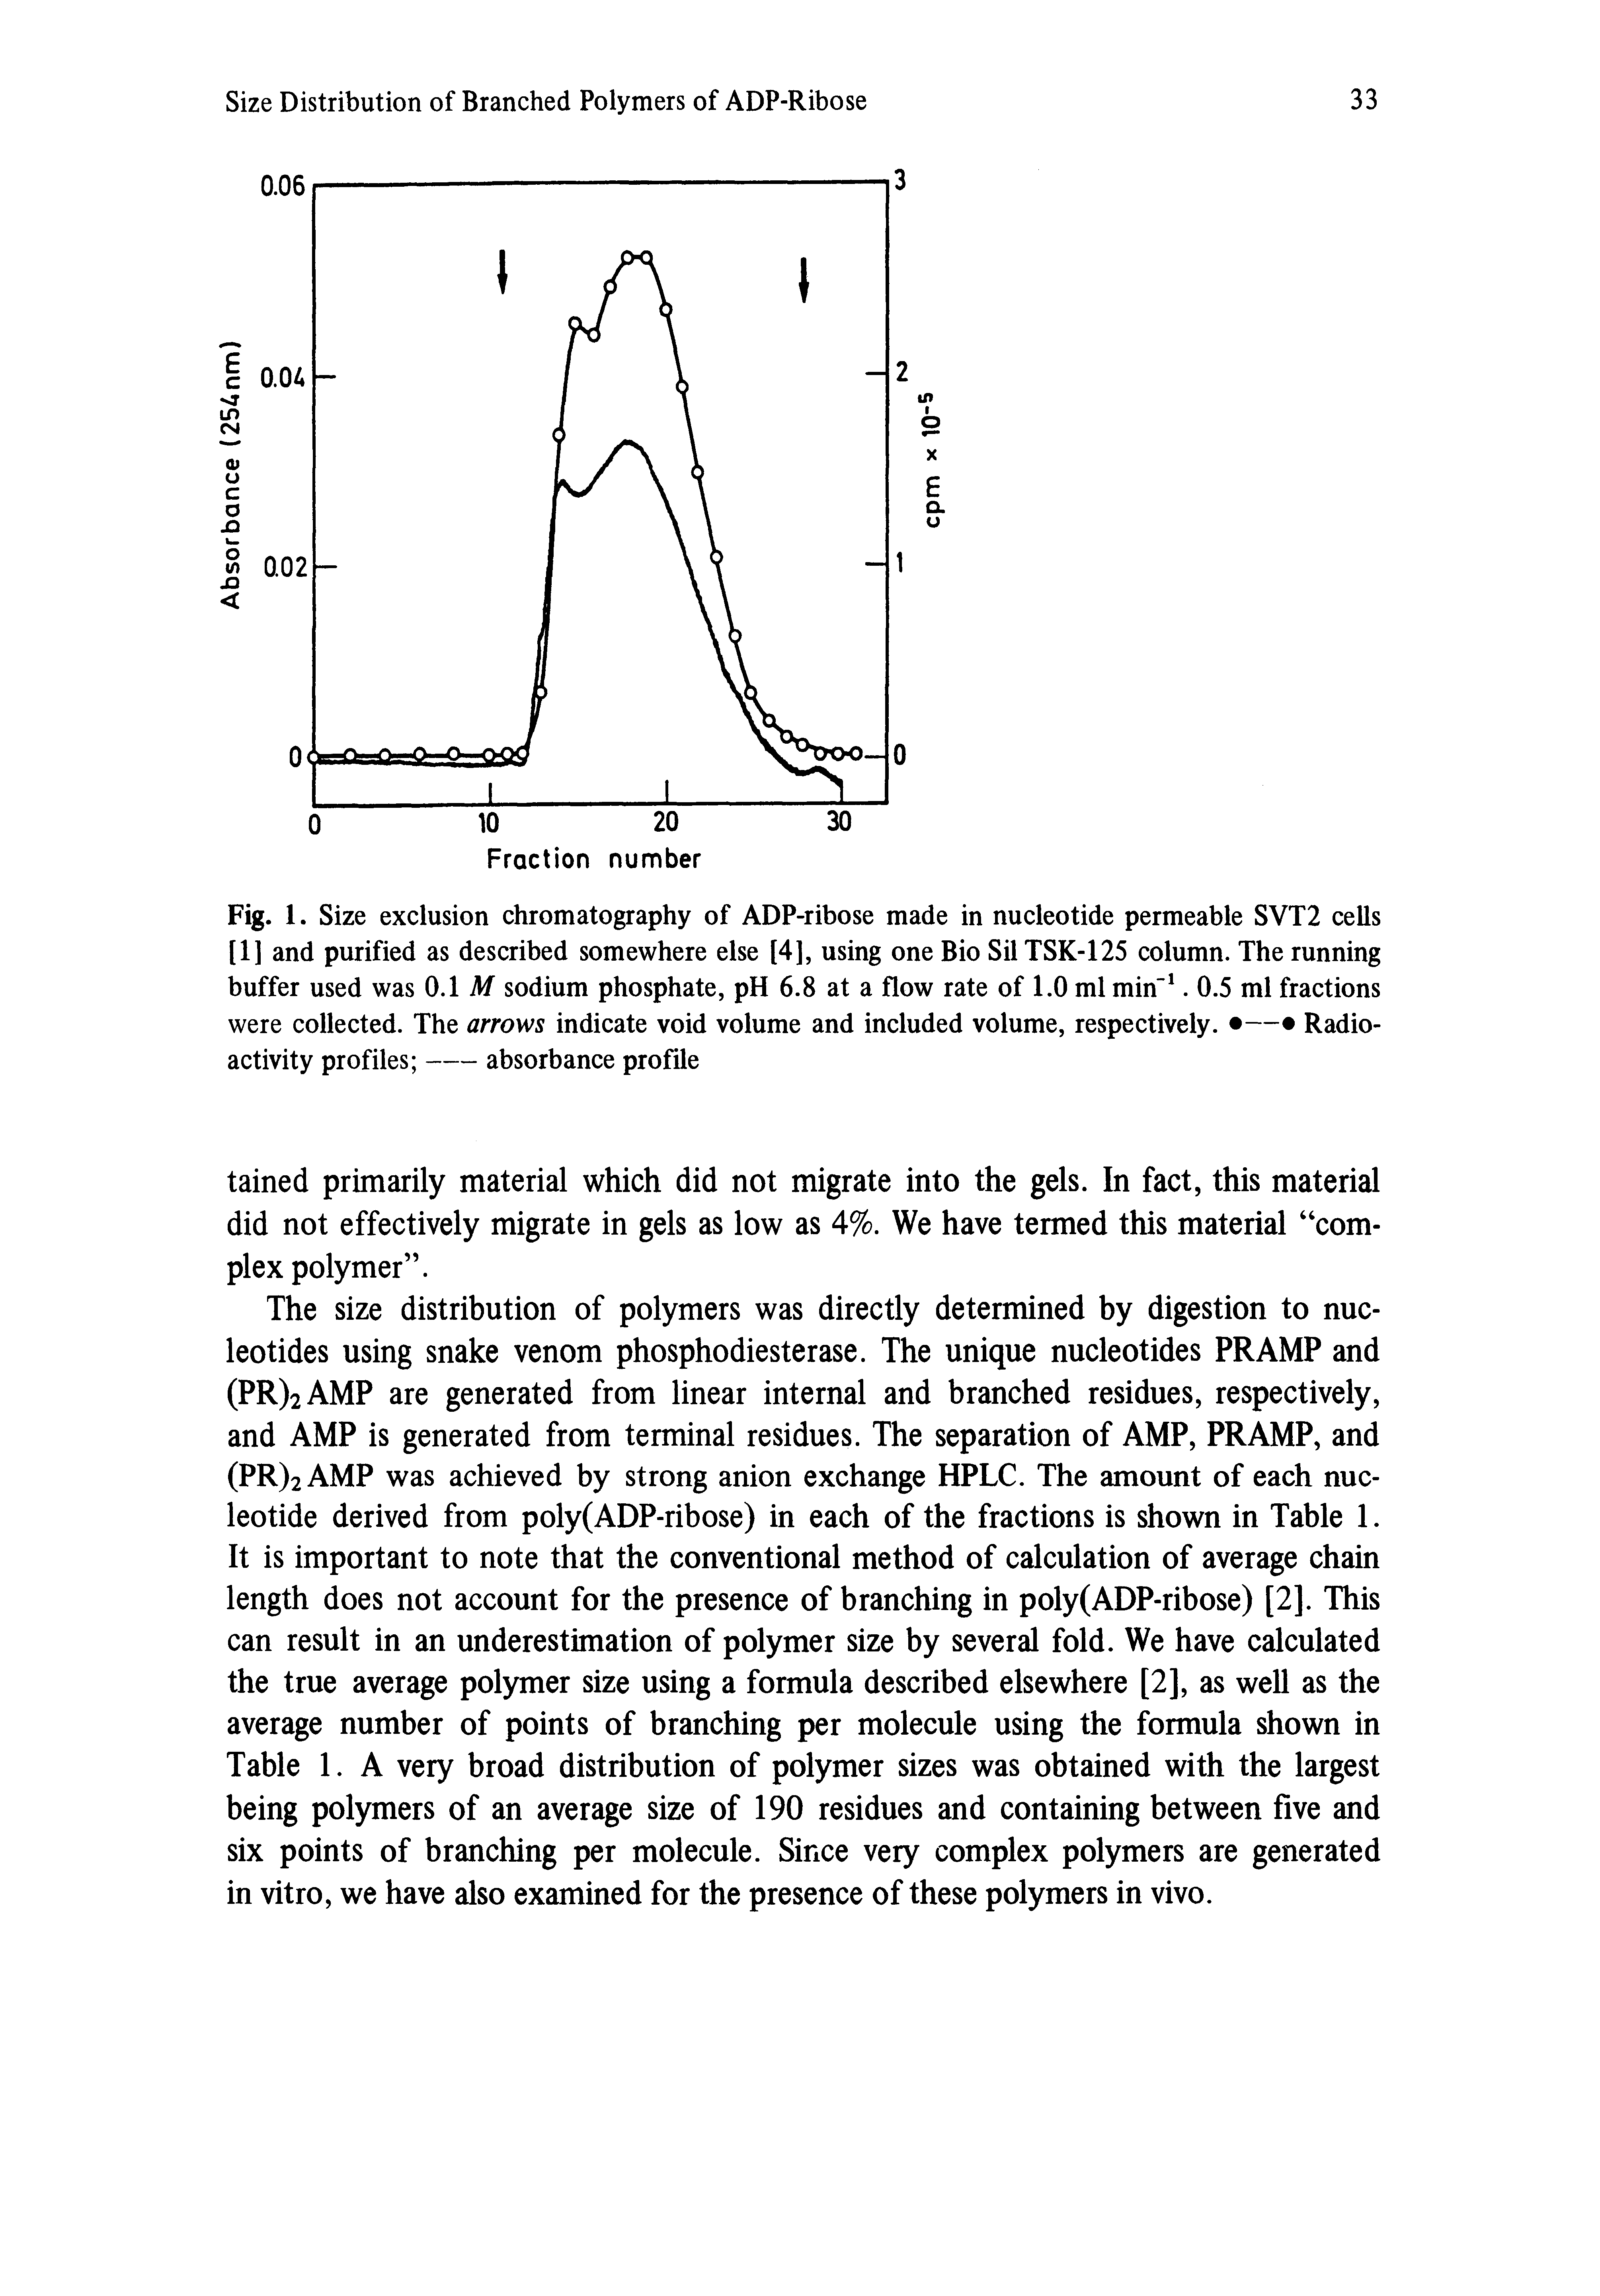 Fig. 1. Size exclusion chromatography of ADP-ribose made in nucleotide permeable SVT2 cells [1] and purified as described somewhere else [4], using one Bio Sil TSK-125 column. The running buffer used was 0.1 A/ sodium phosphate, pH 6.8 at a flow rate of 1.0 ml min". 0.5 ml fractions were collected. The arrows indicate void volume and included volume, respectively. — Radioactivity profiles -absorbance profile...